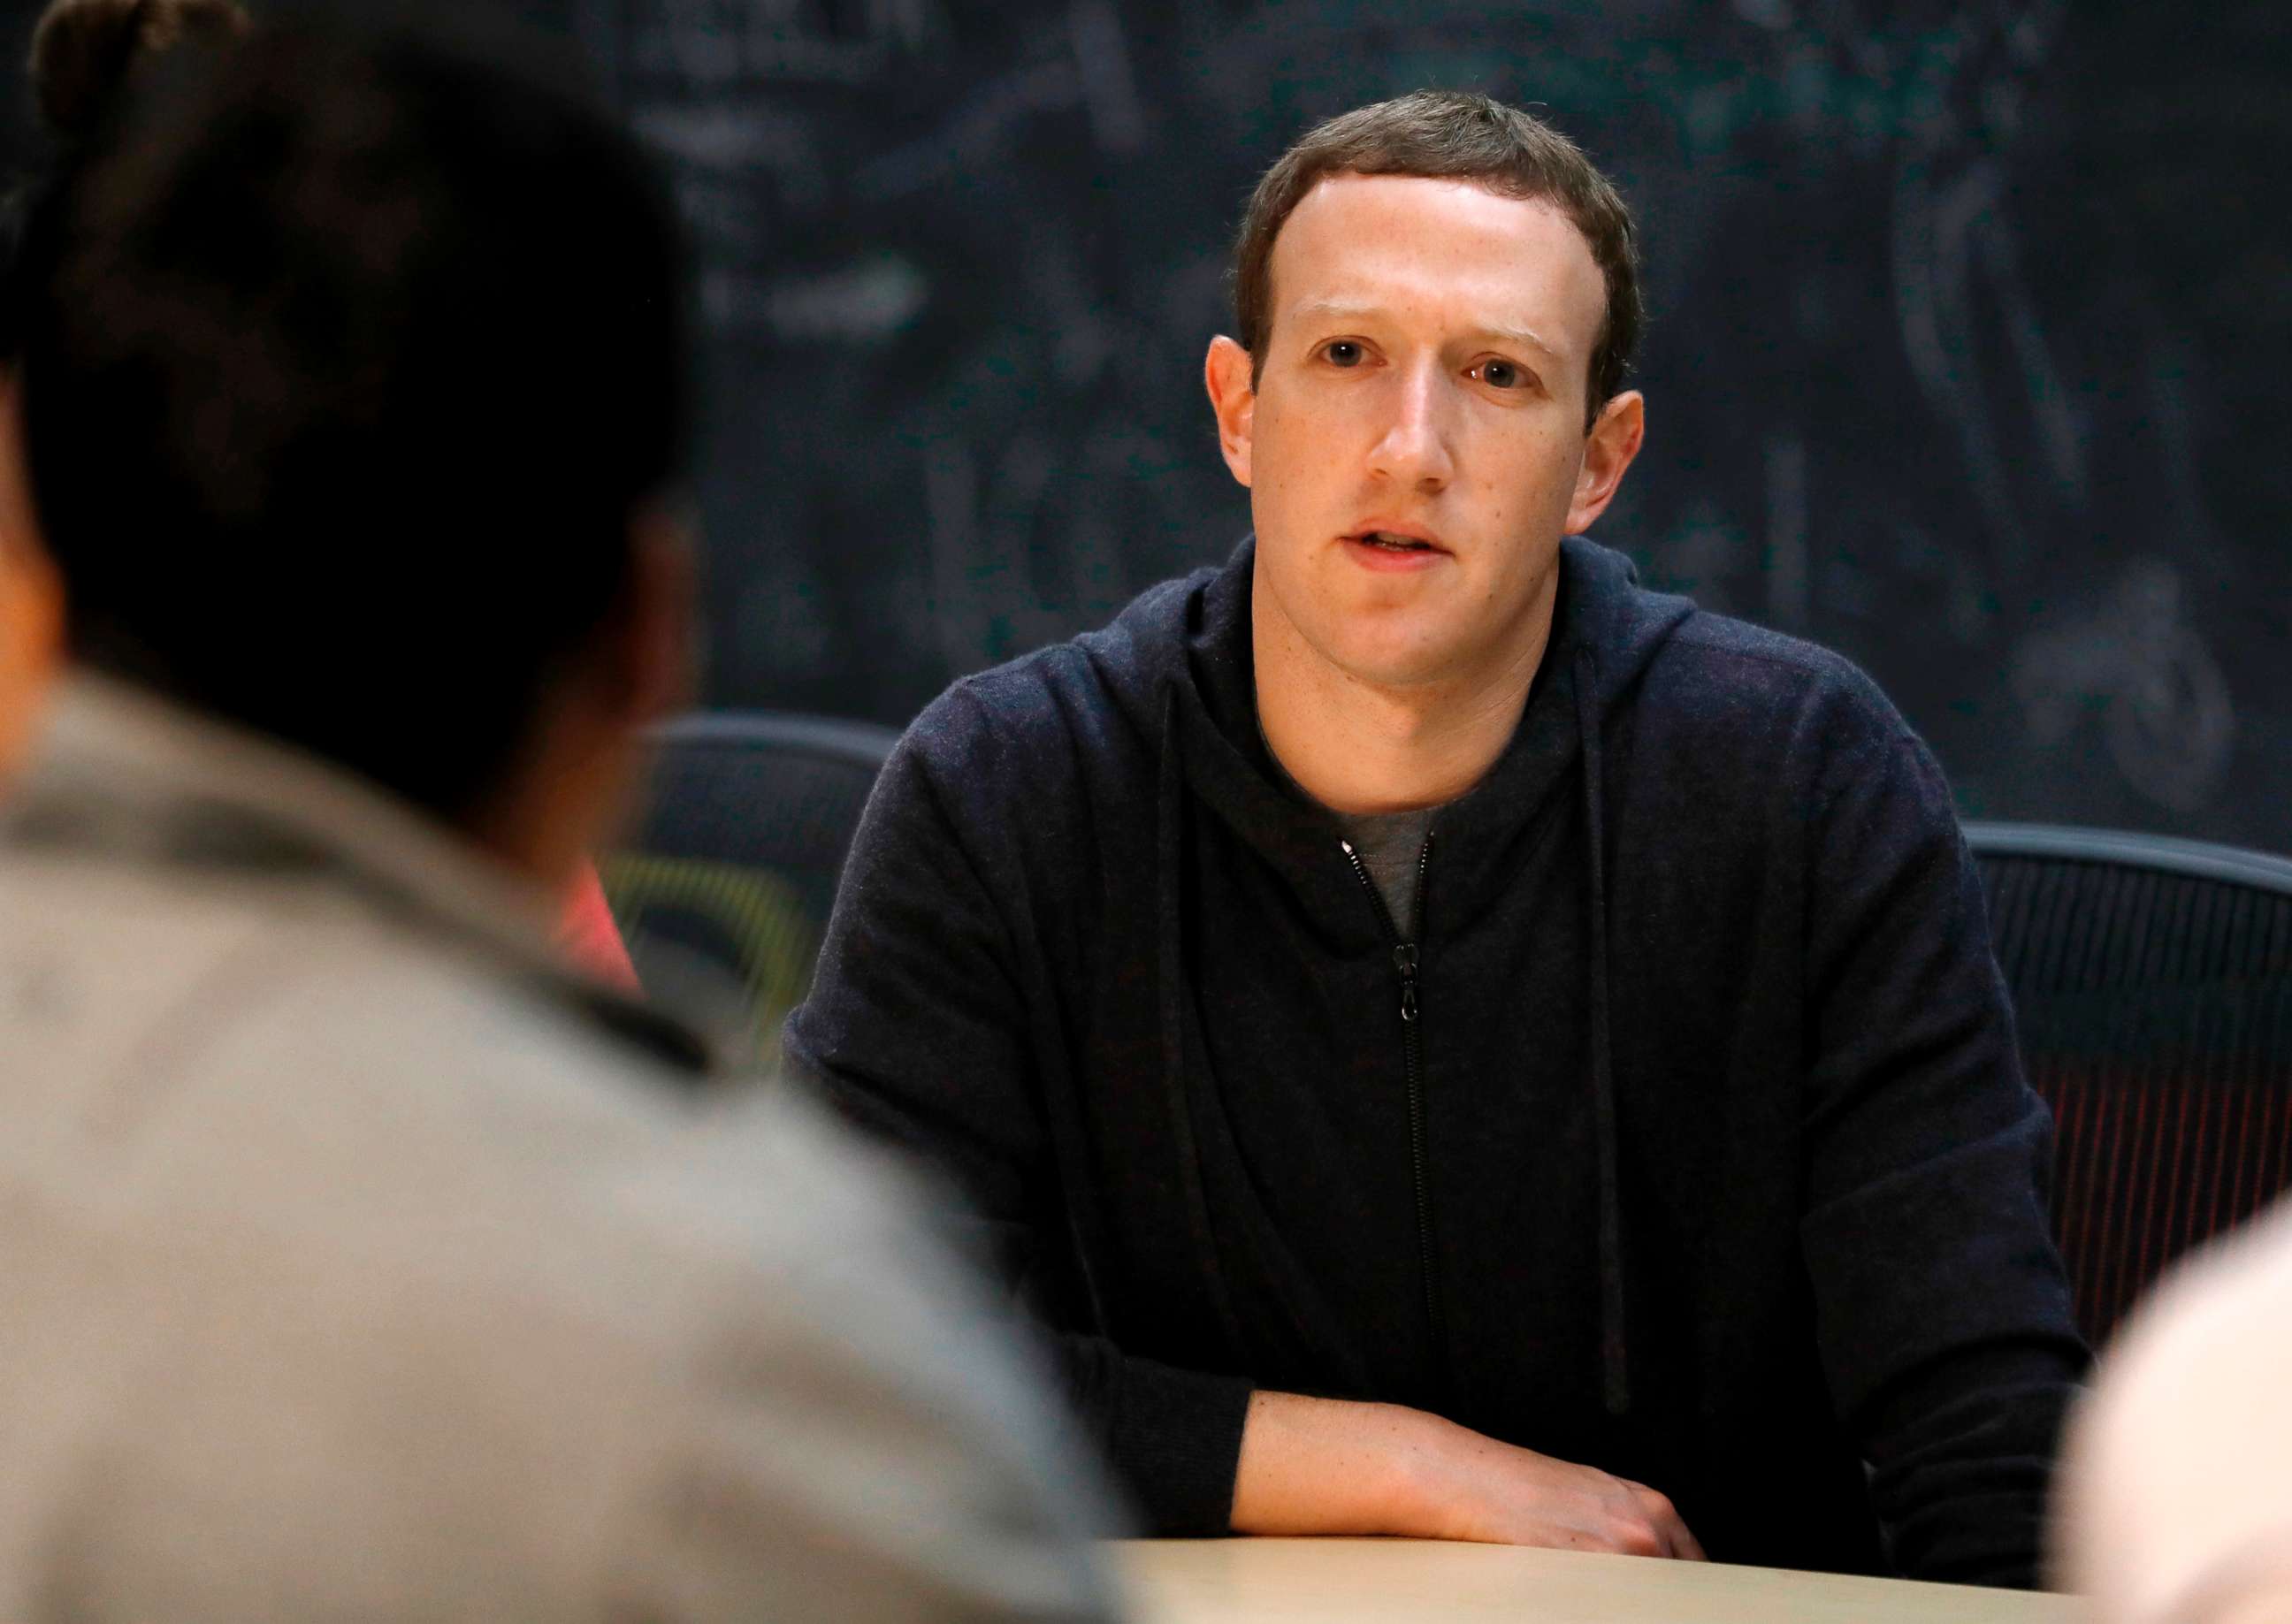 PHOTO: In this Nov. 9, 2017, file photo, Facebook CEO Mark Zuckerberg meets with a group of entrepreneurs and innovators during a round-table discussion in St. Louis.